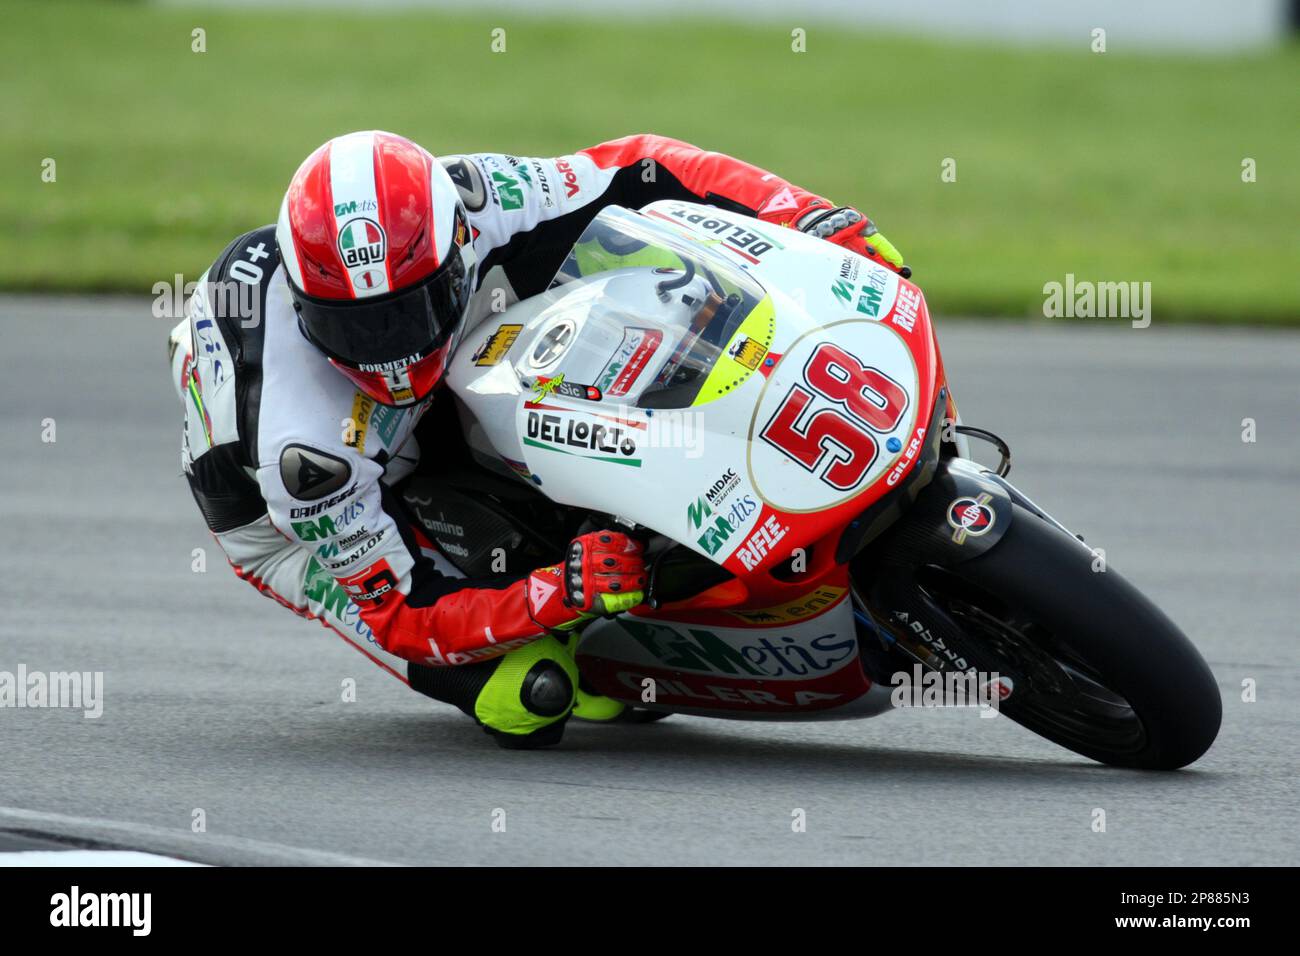 Metis Gilera's Italian MotoGP rider Marco Simoncelli takes the Melbourne  loop during practice at the British Motorcycle Grand Prix at the Donington  Circuit, in Donington, England, Saturday July 25, 2009. (AP Photo/Tom